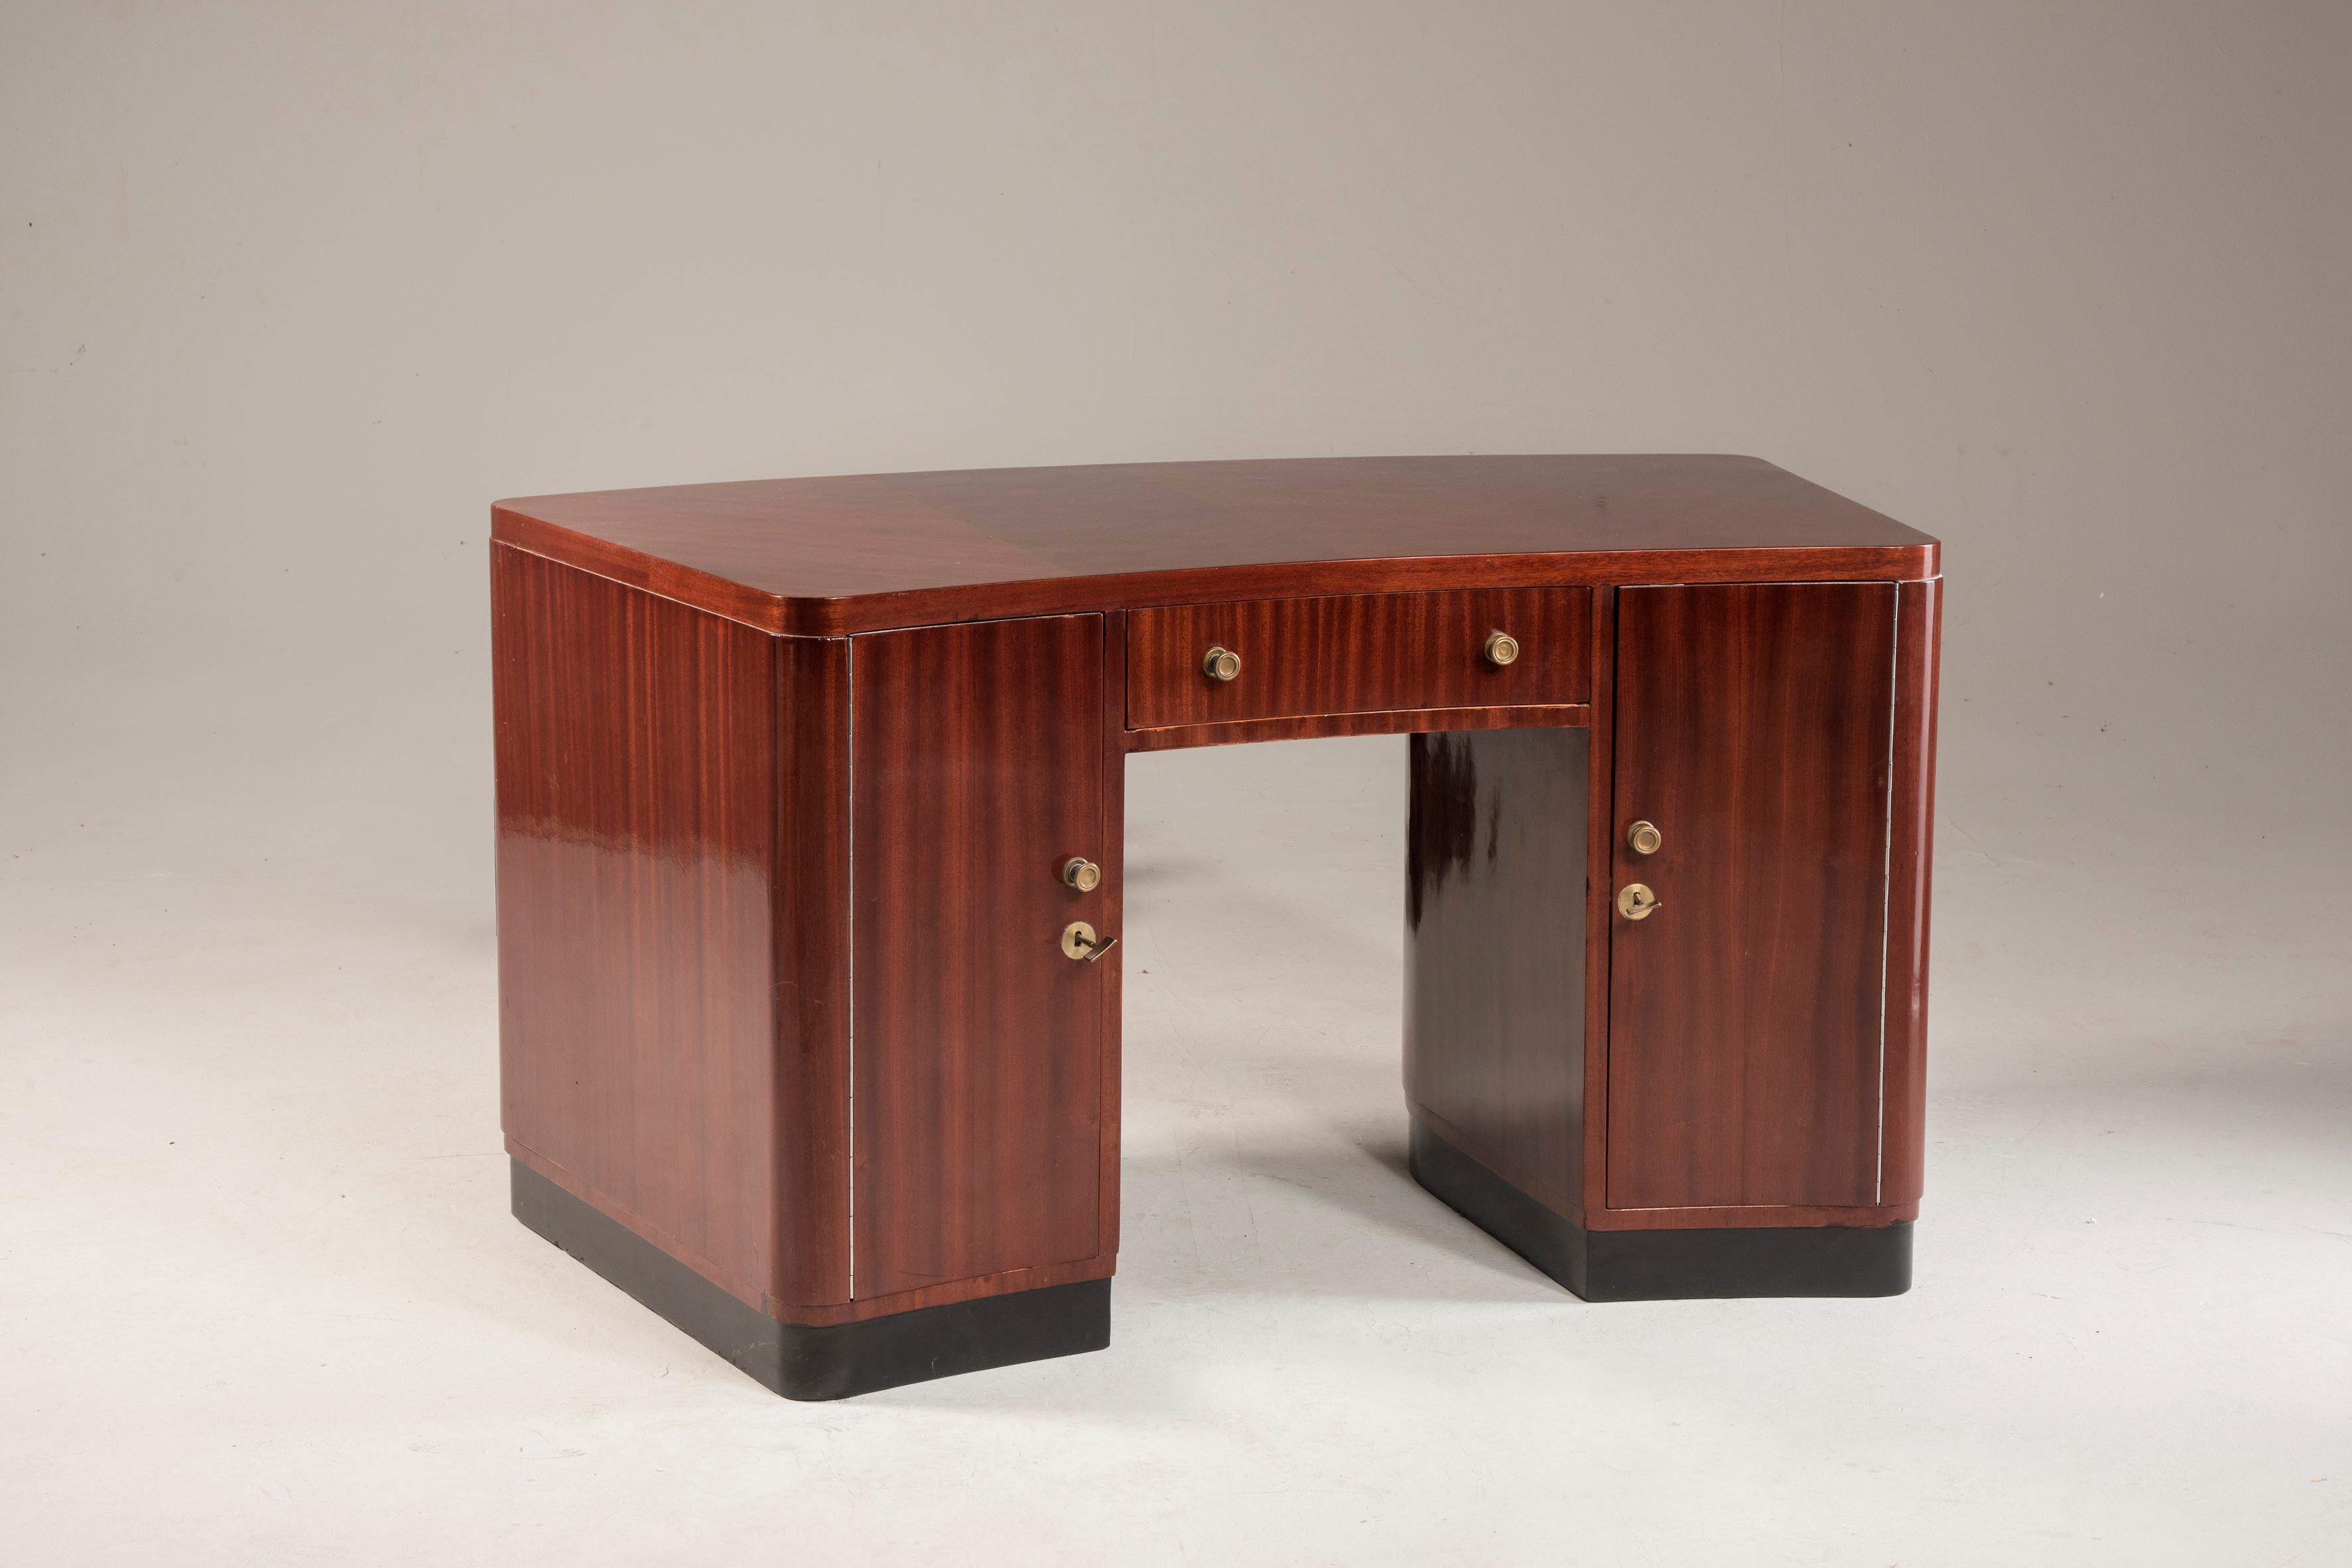 20th Century Art Deco Mahogany Curved Desk with doors and drawers